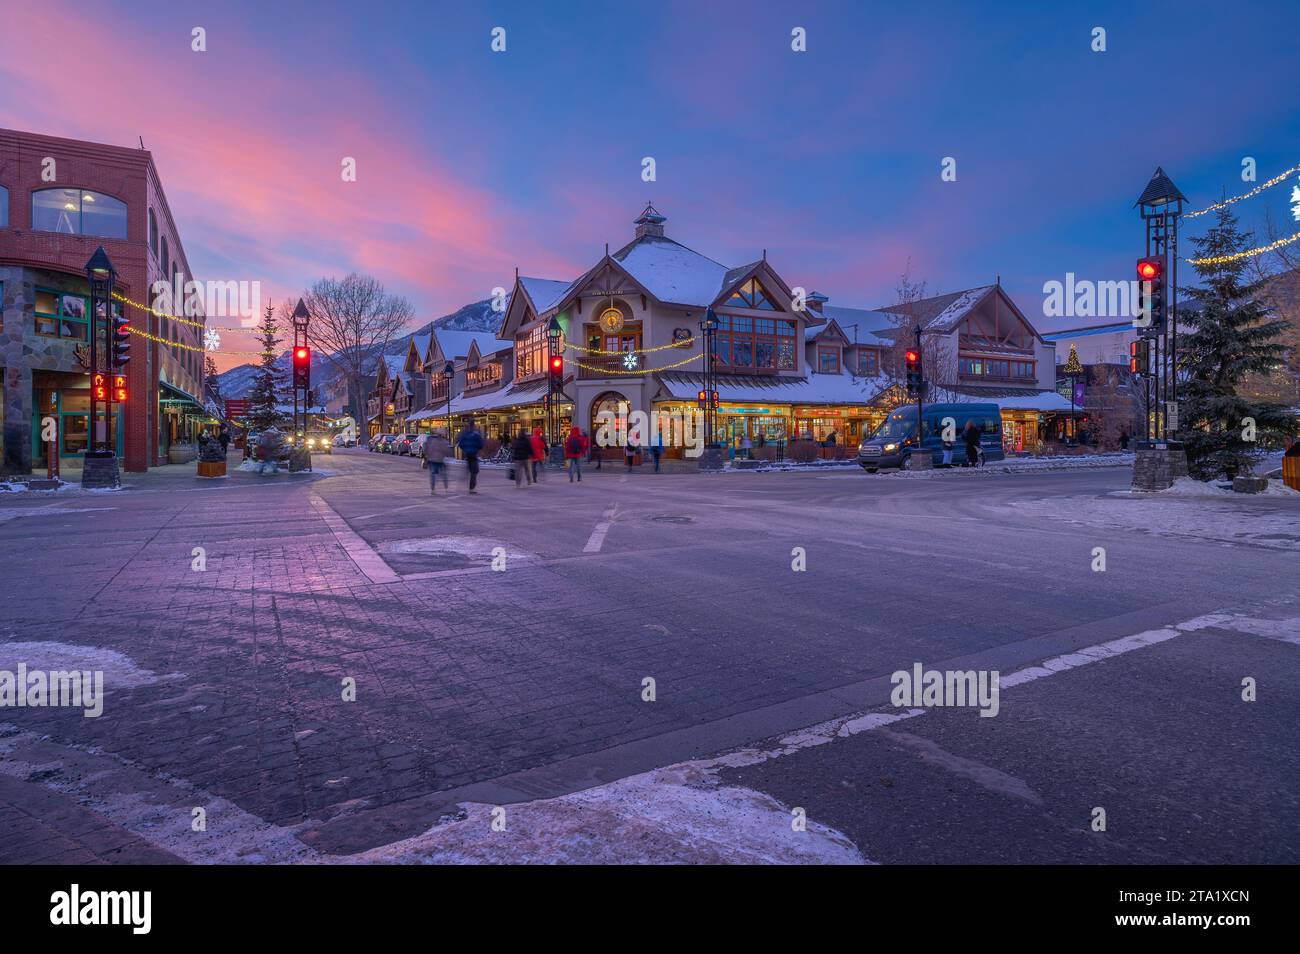 Banff, Alberta, Canada – November 27:  Shoppers and stores at a Banff Avenue intersection in the downtown district Stock Photo